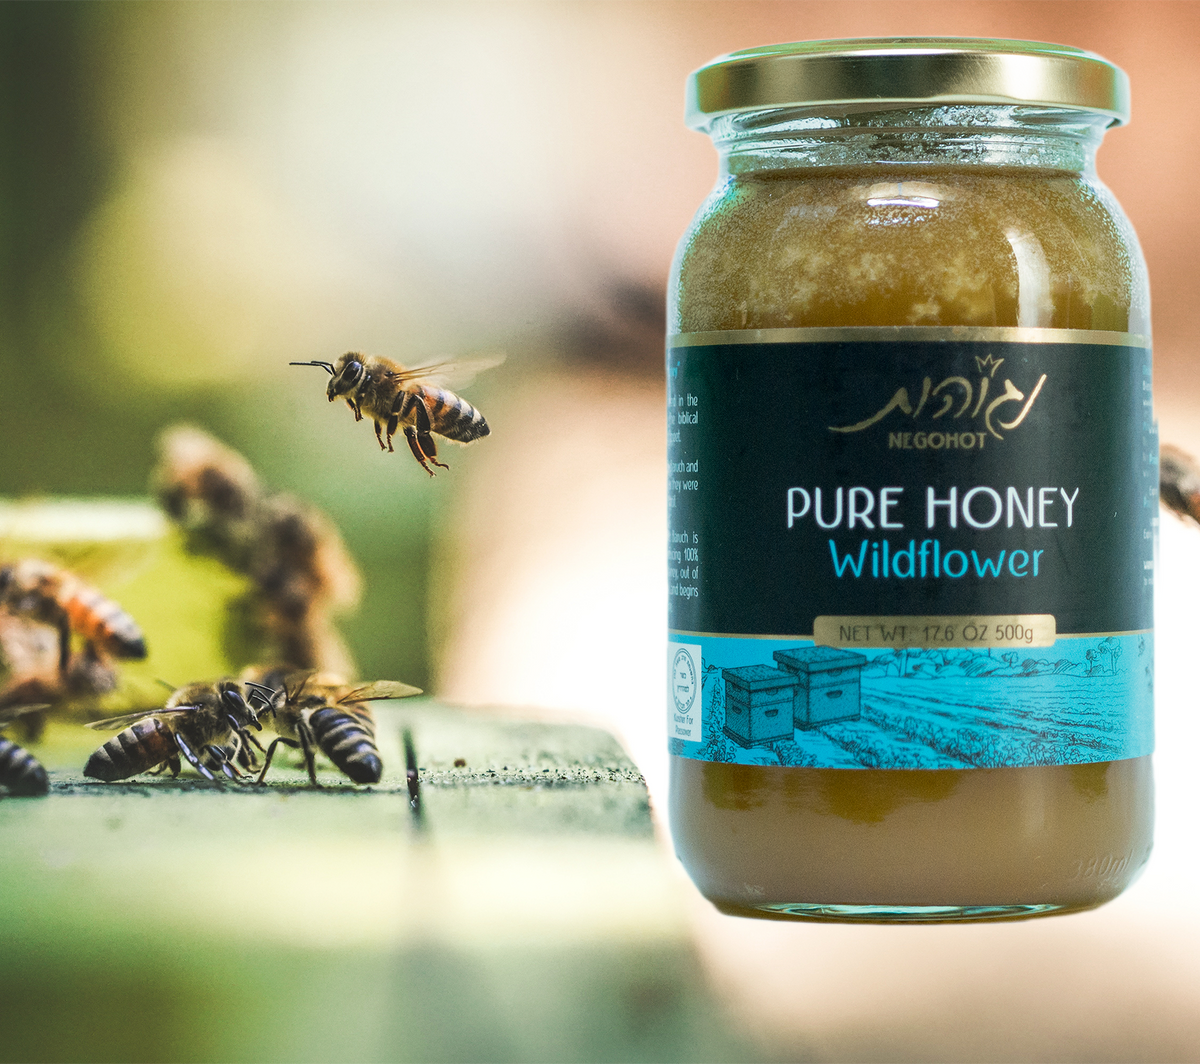 All Natural, Raw, and Unfiltered Wildflower Honey from Judea and Samaria Israel